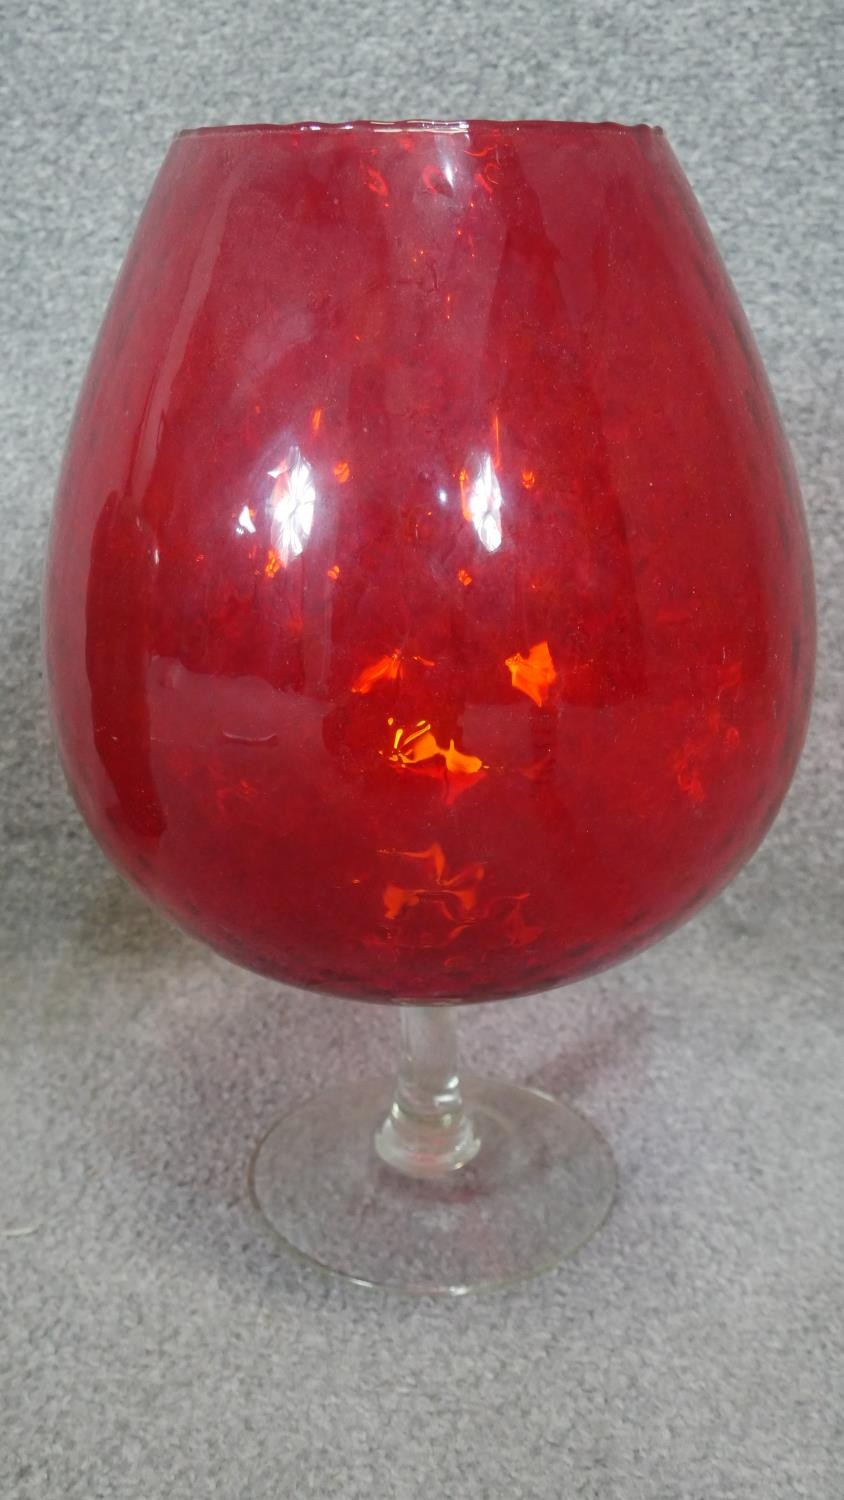 A collection of glass and porcelain. Including a large red Murano glass vase on clear stem, a - Image 4 of 5